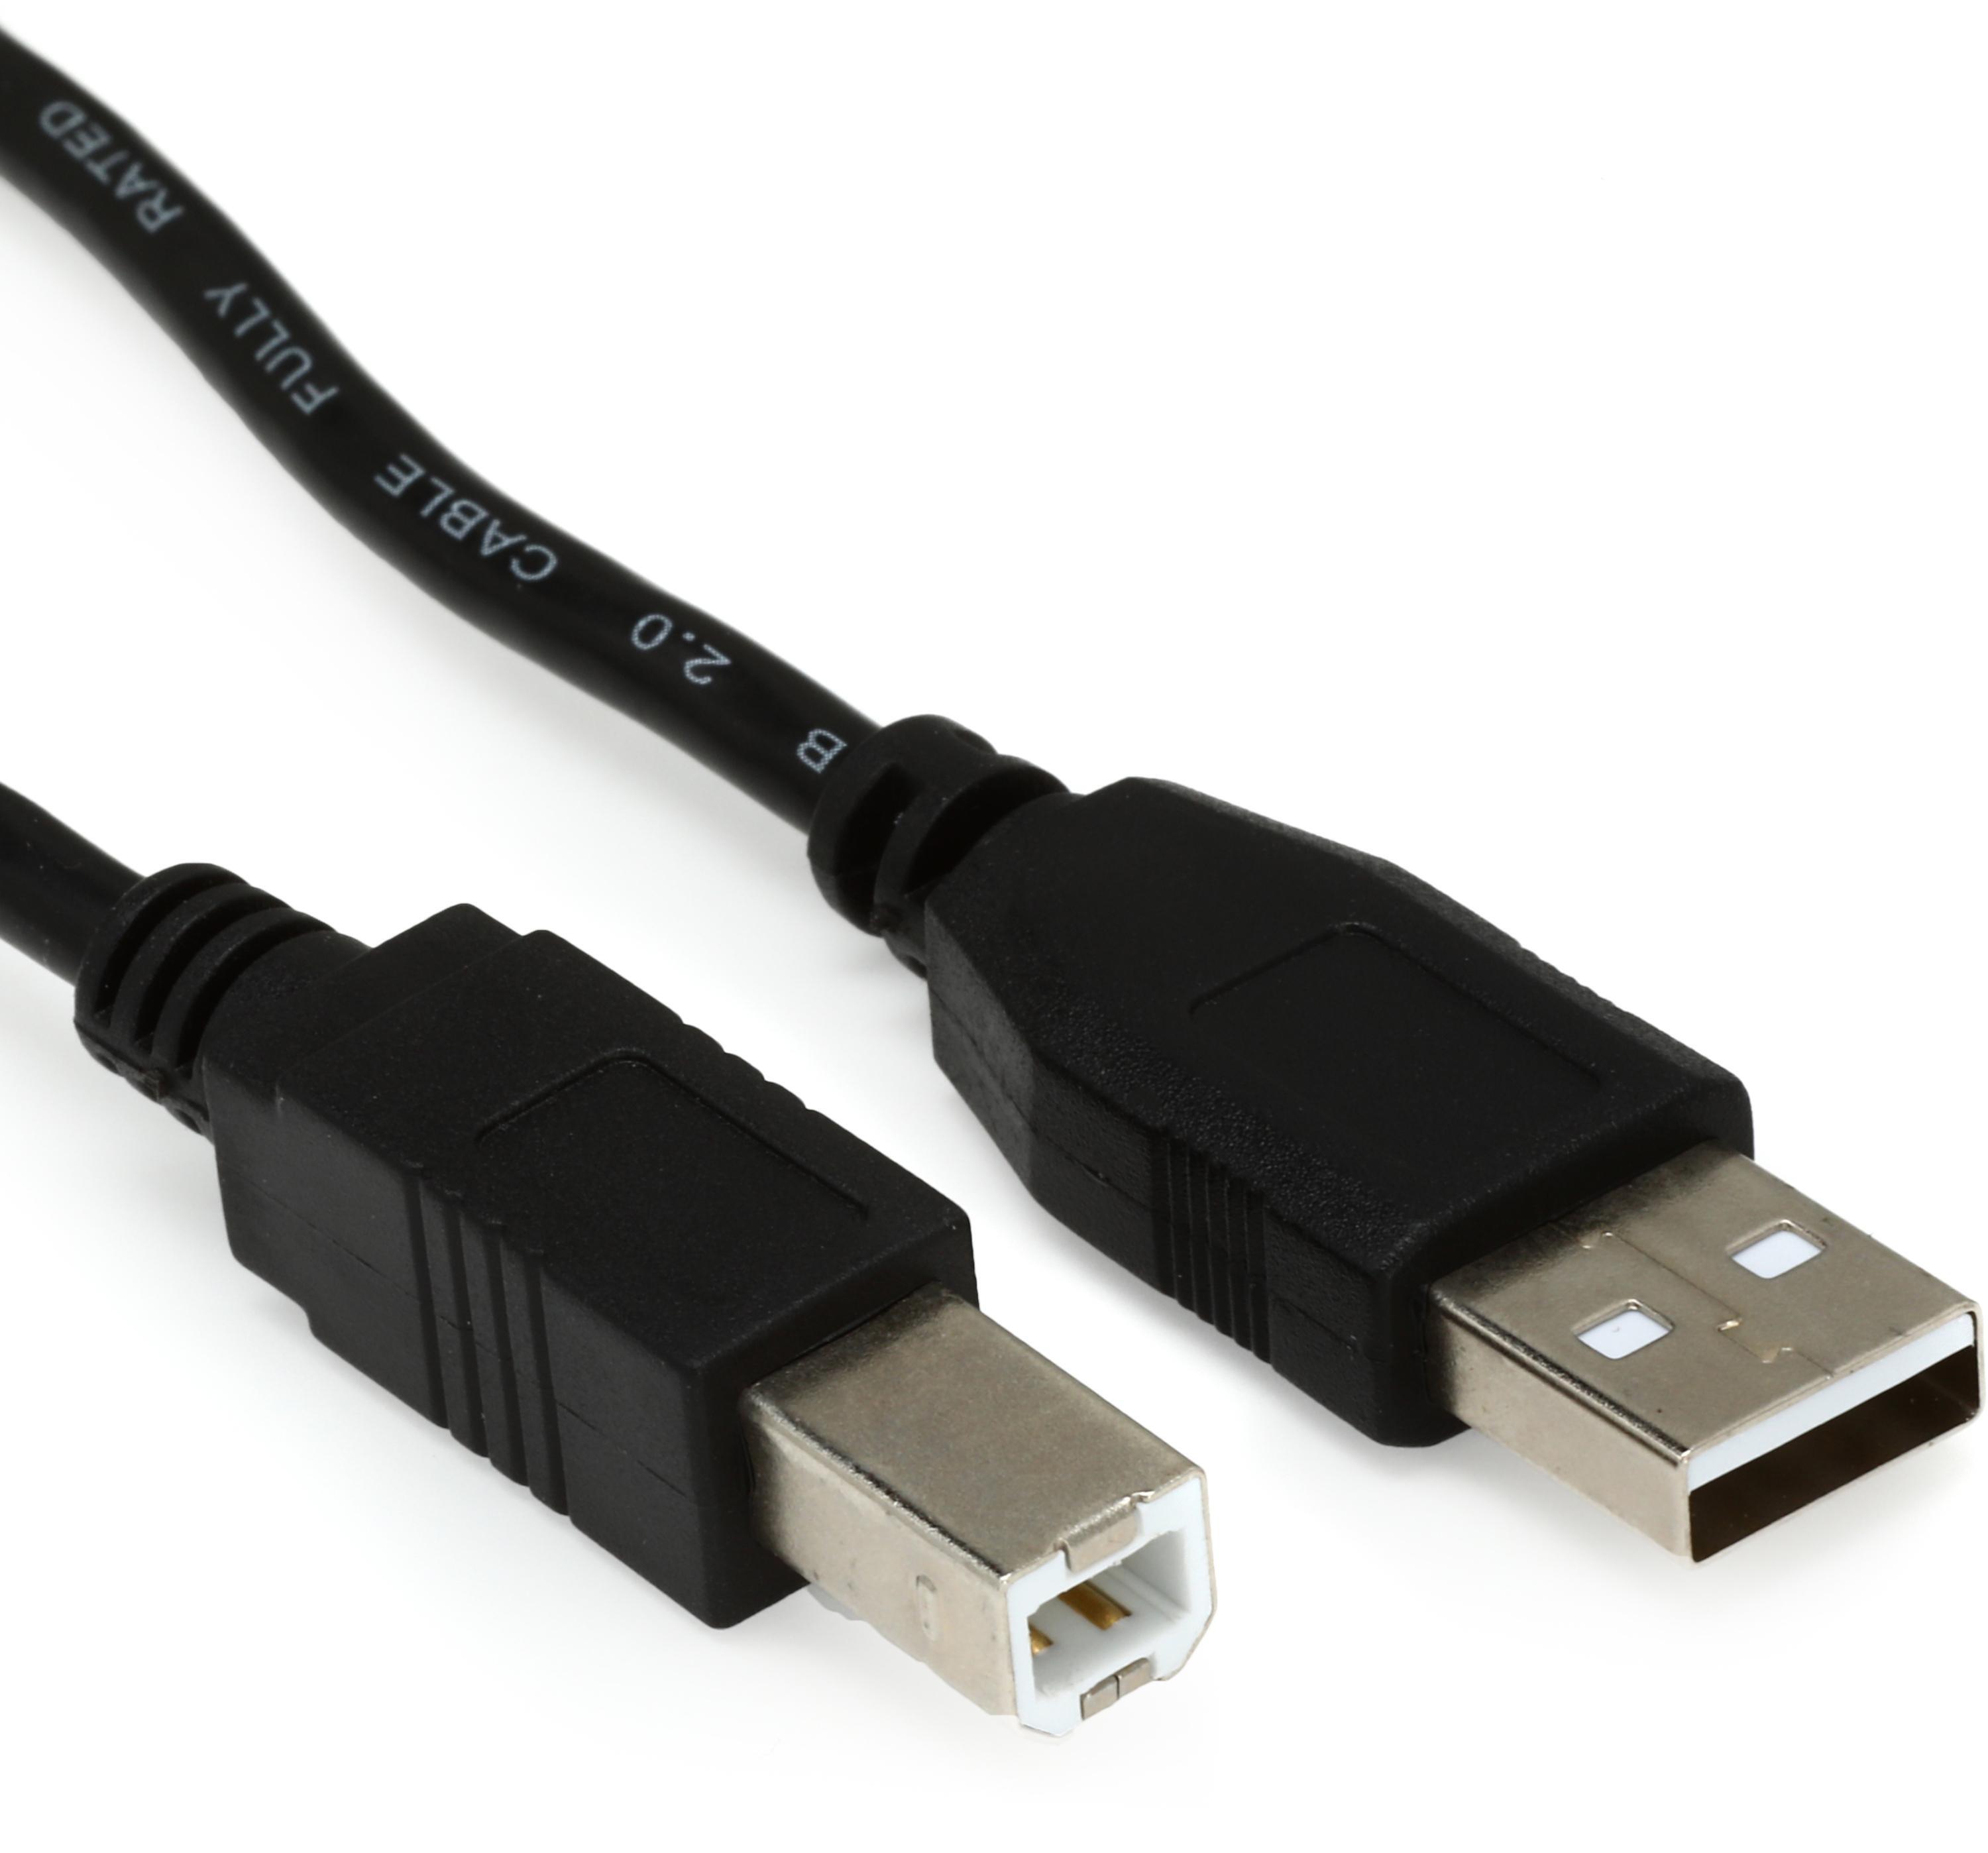 Hosa USB-203AB USB 2.0 Type A to Type B Cable - 3 foot